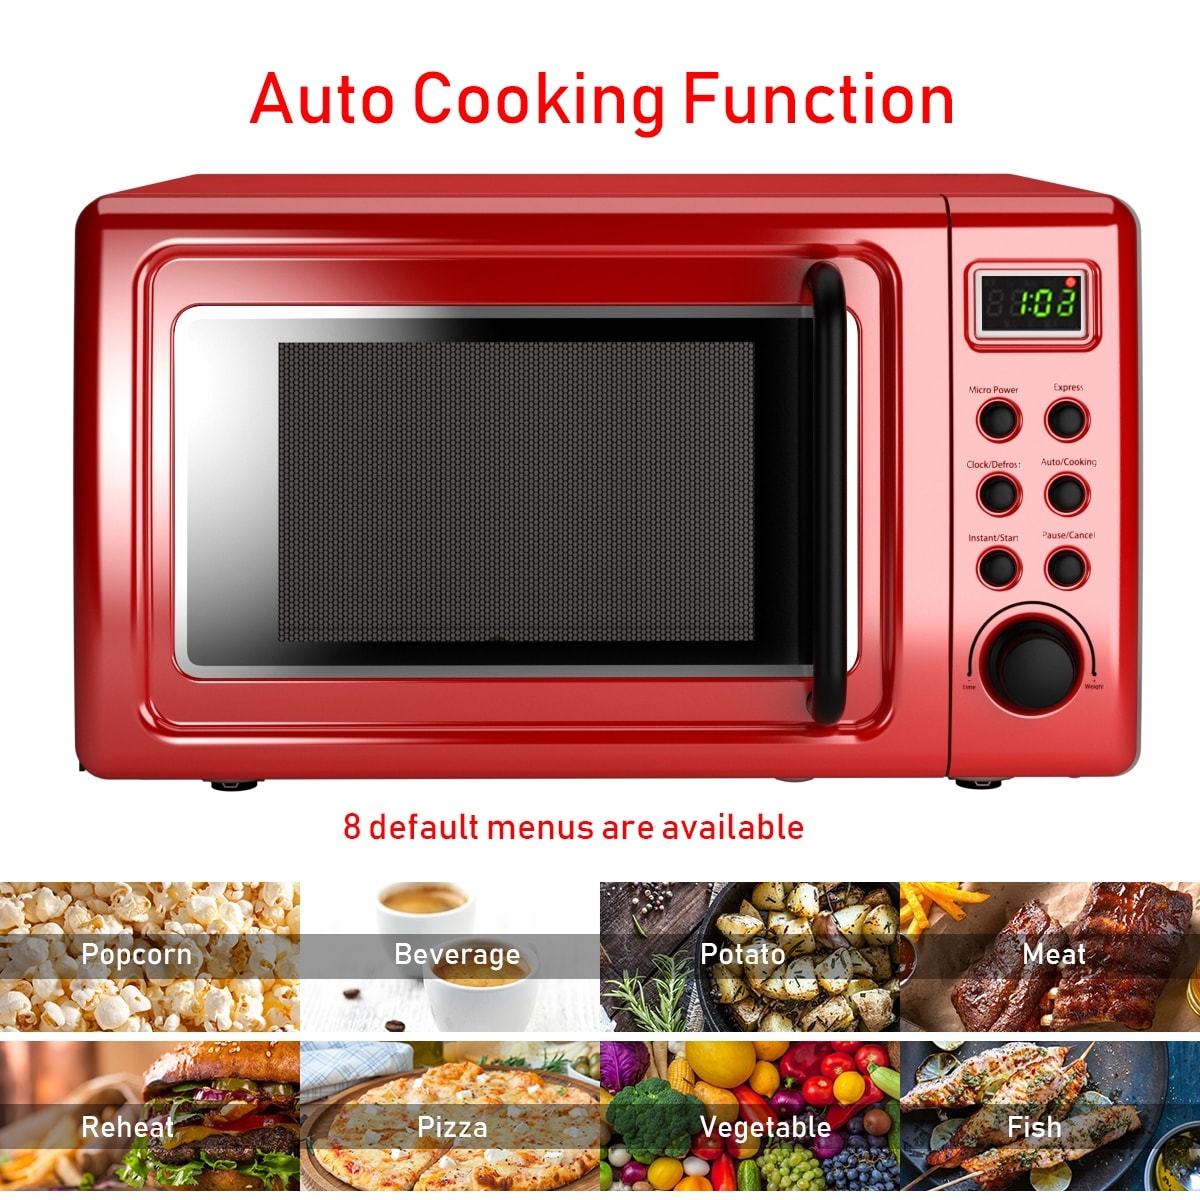 https://ak1.ostkcdn.com/images/products/is/images/direct/2a8c2f51359c21d6dfec5e944acb1e2ced0ef9e8/Costway-0.7Cu.ft-Retro-Countertop-Microwave-Oven-700W-LED-Display-Glass-Turntable-RedGreenblack-rose-gold.jpg